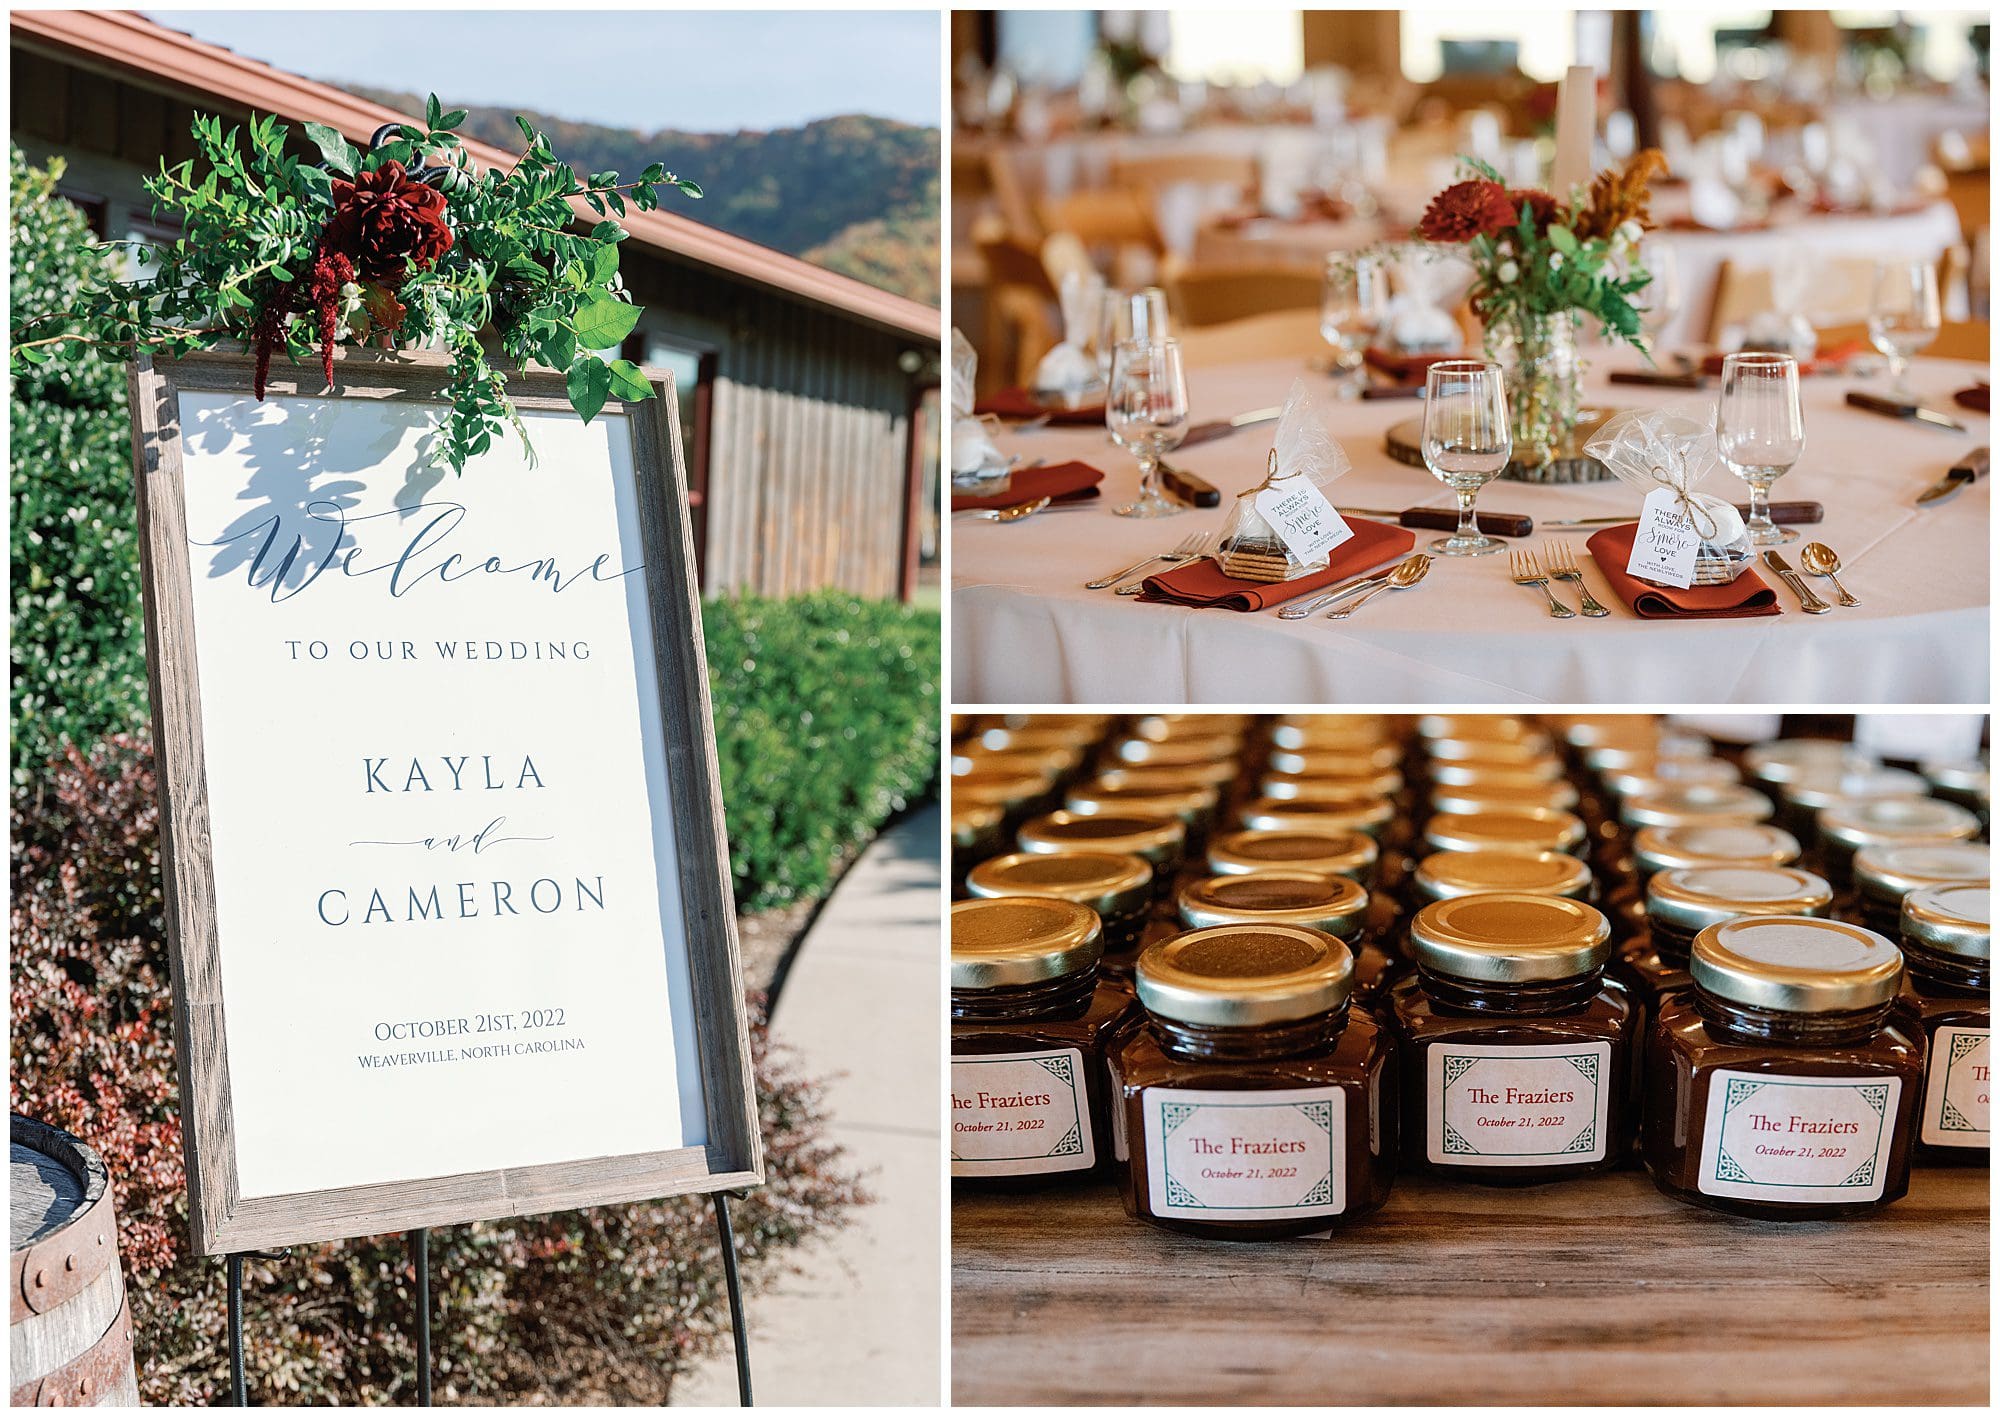 Left: a wedding welcome sign adorned with greenery and red flowers. right: rows of wedding favors, small jars of honey with personalized labels.